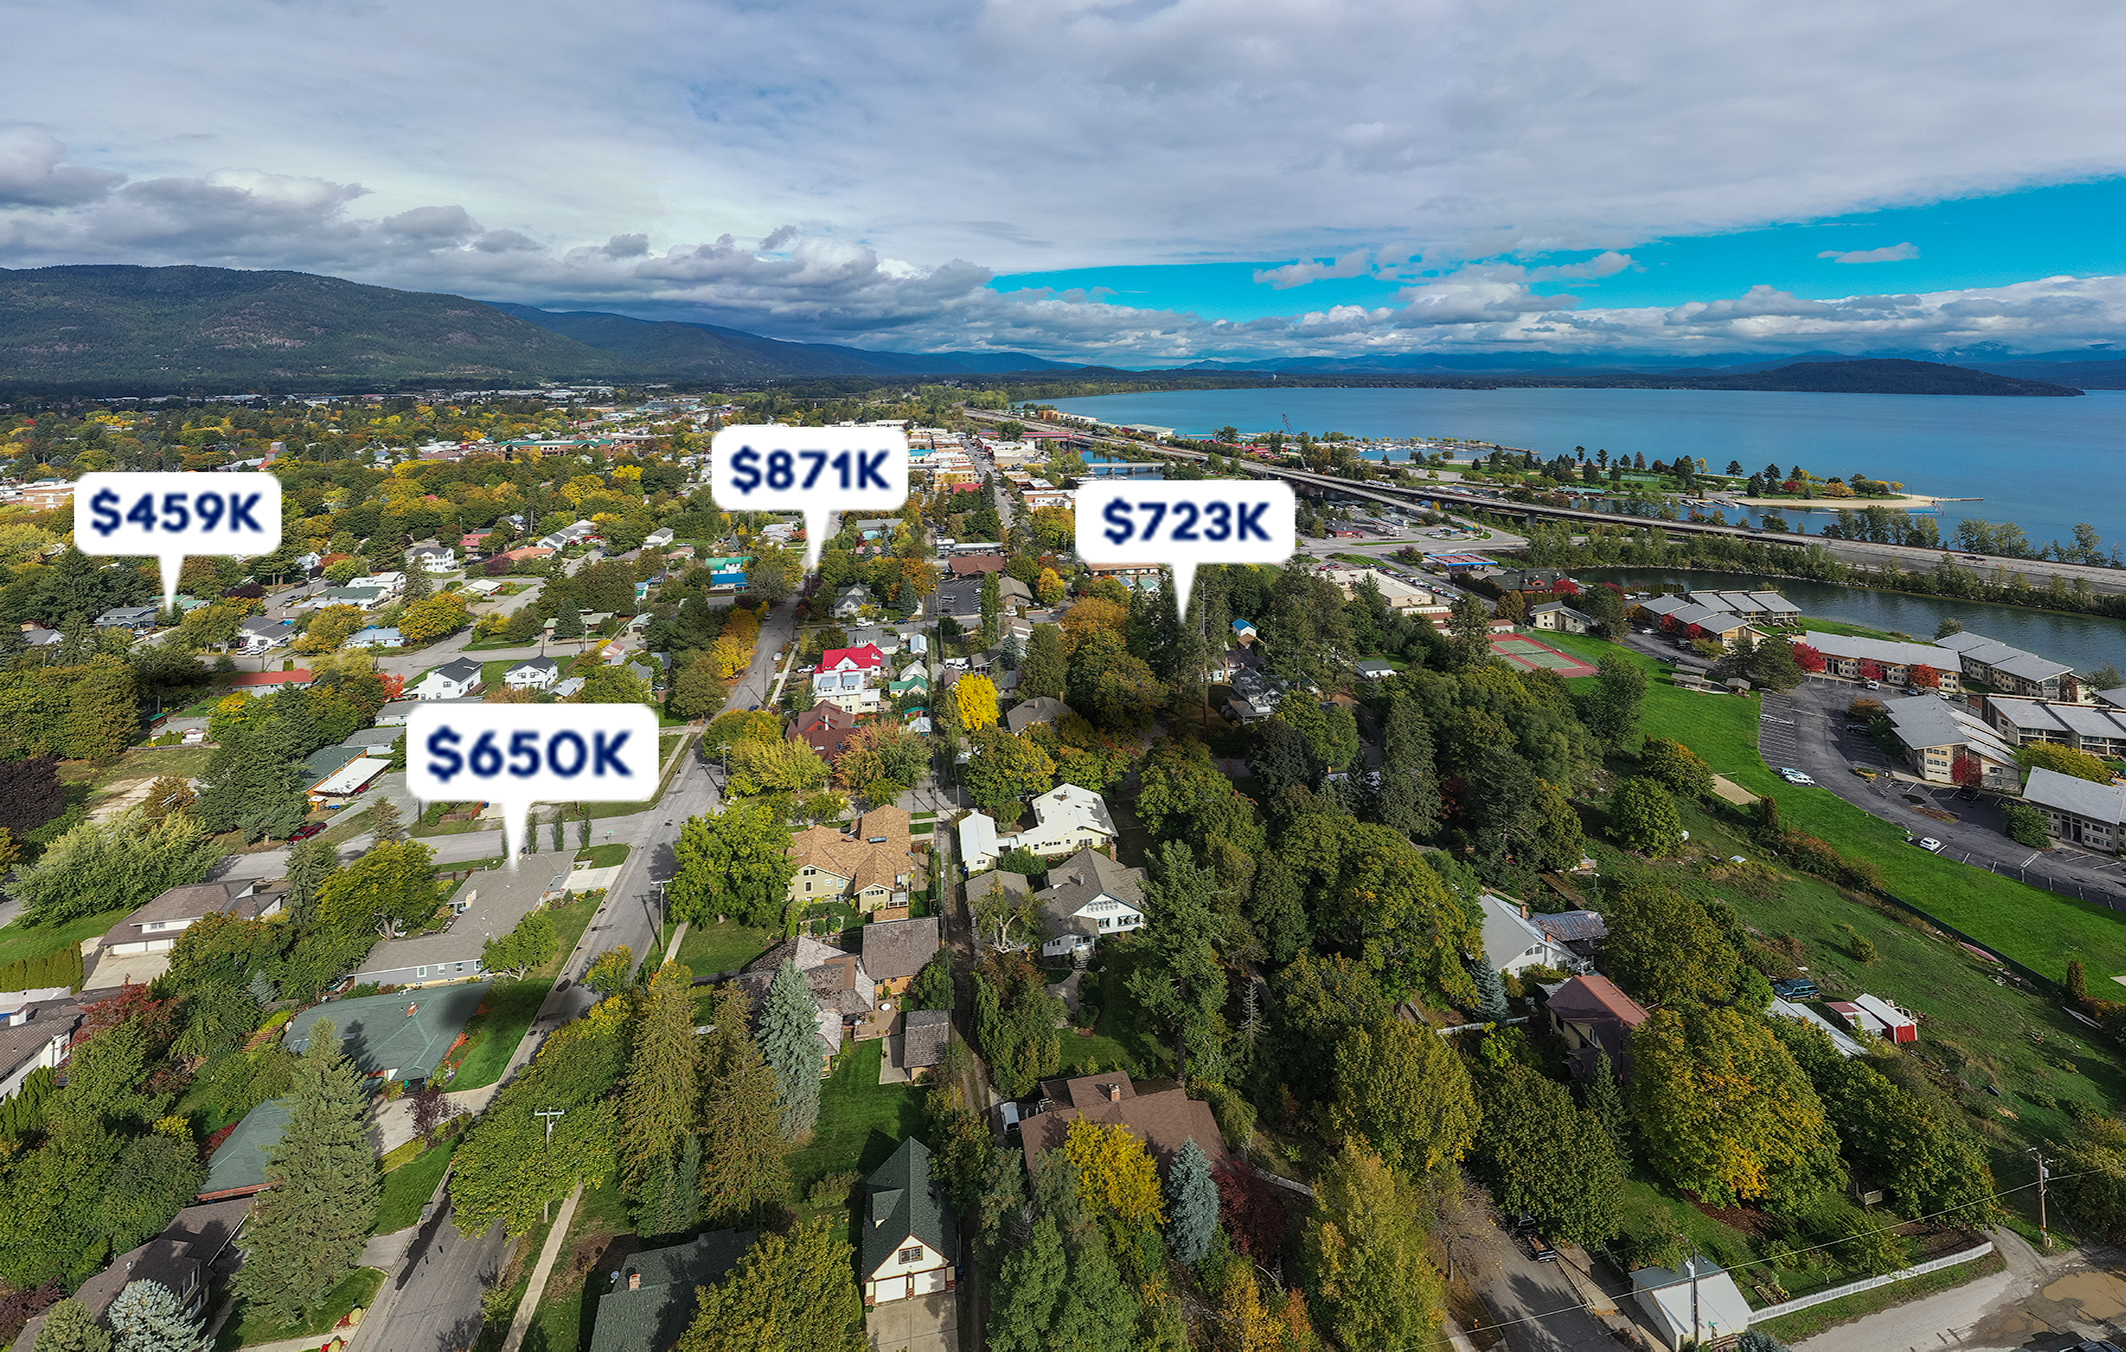 Homes for sale in Sandpoint Idaho